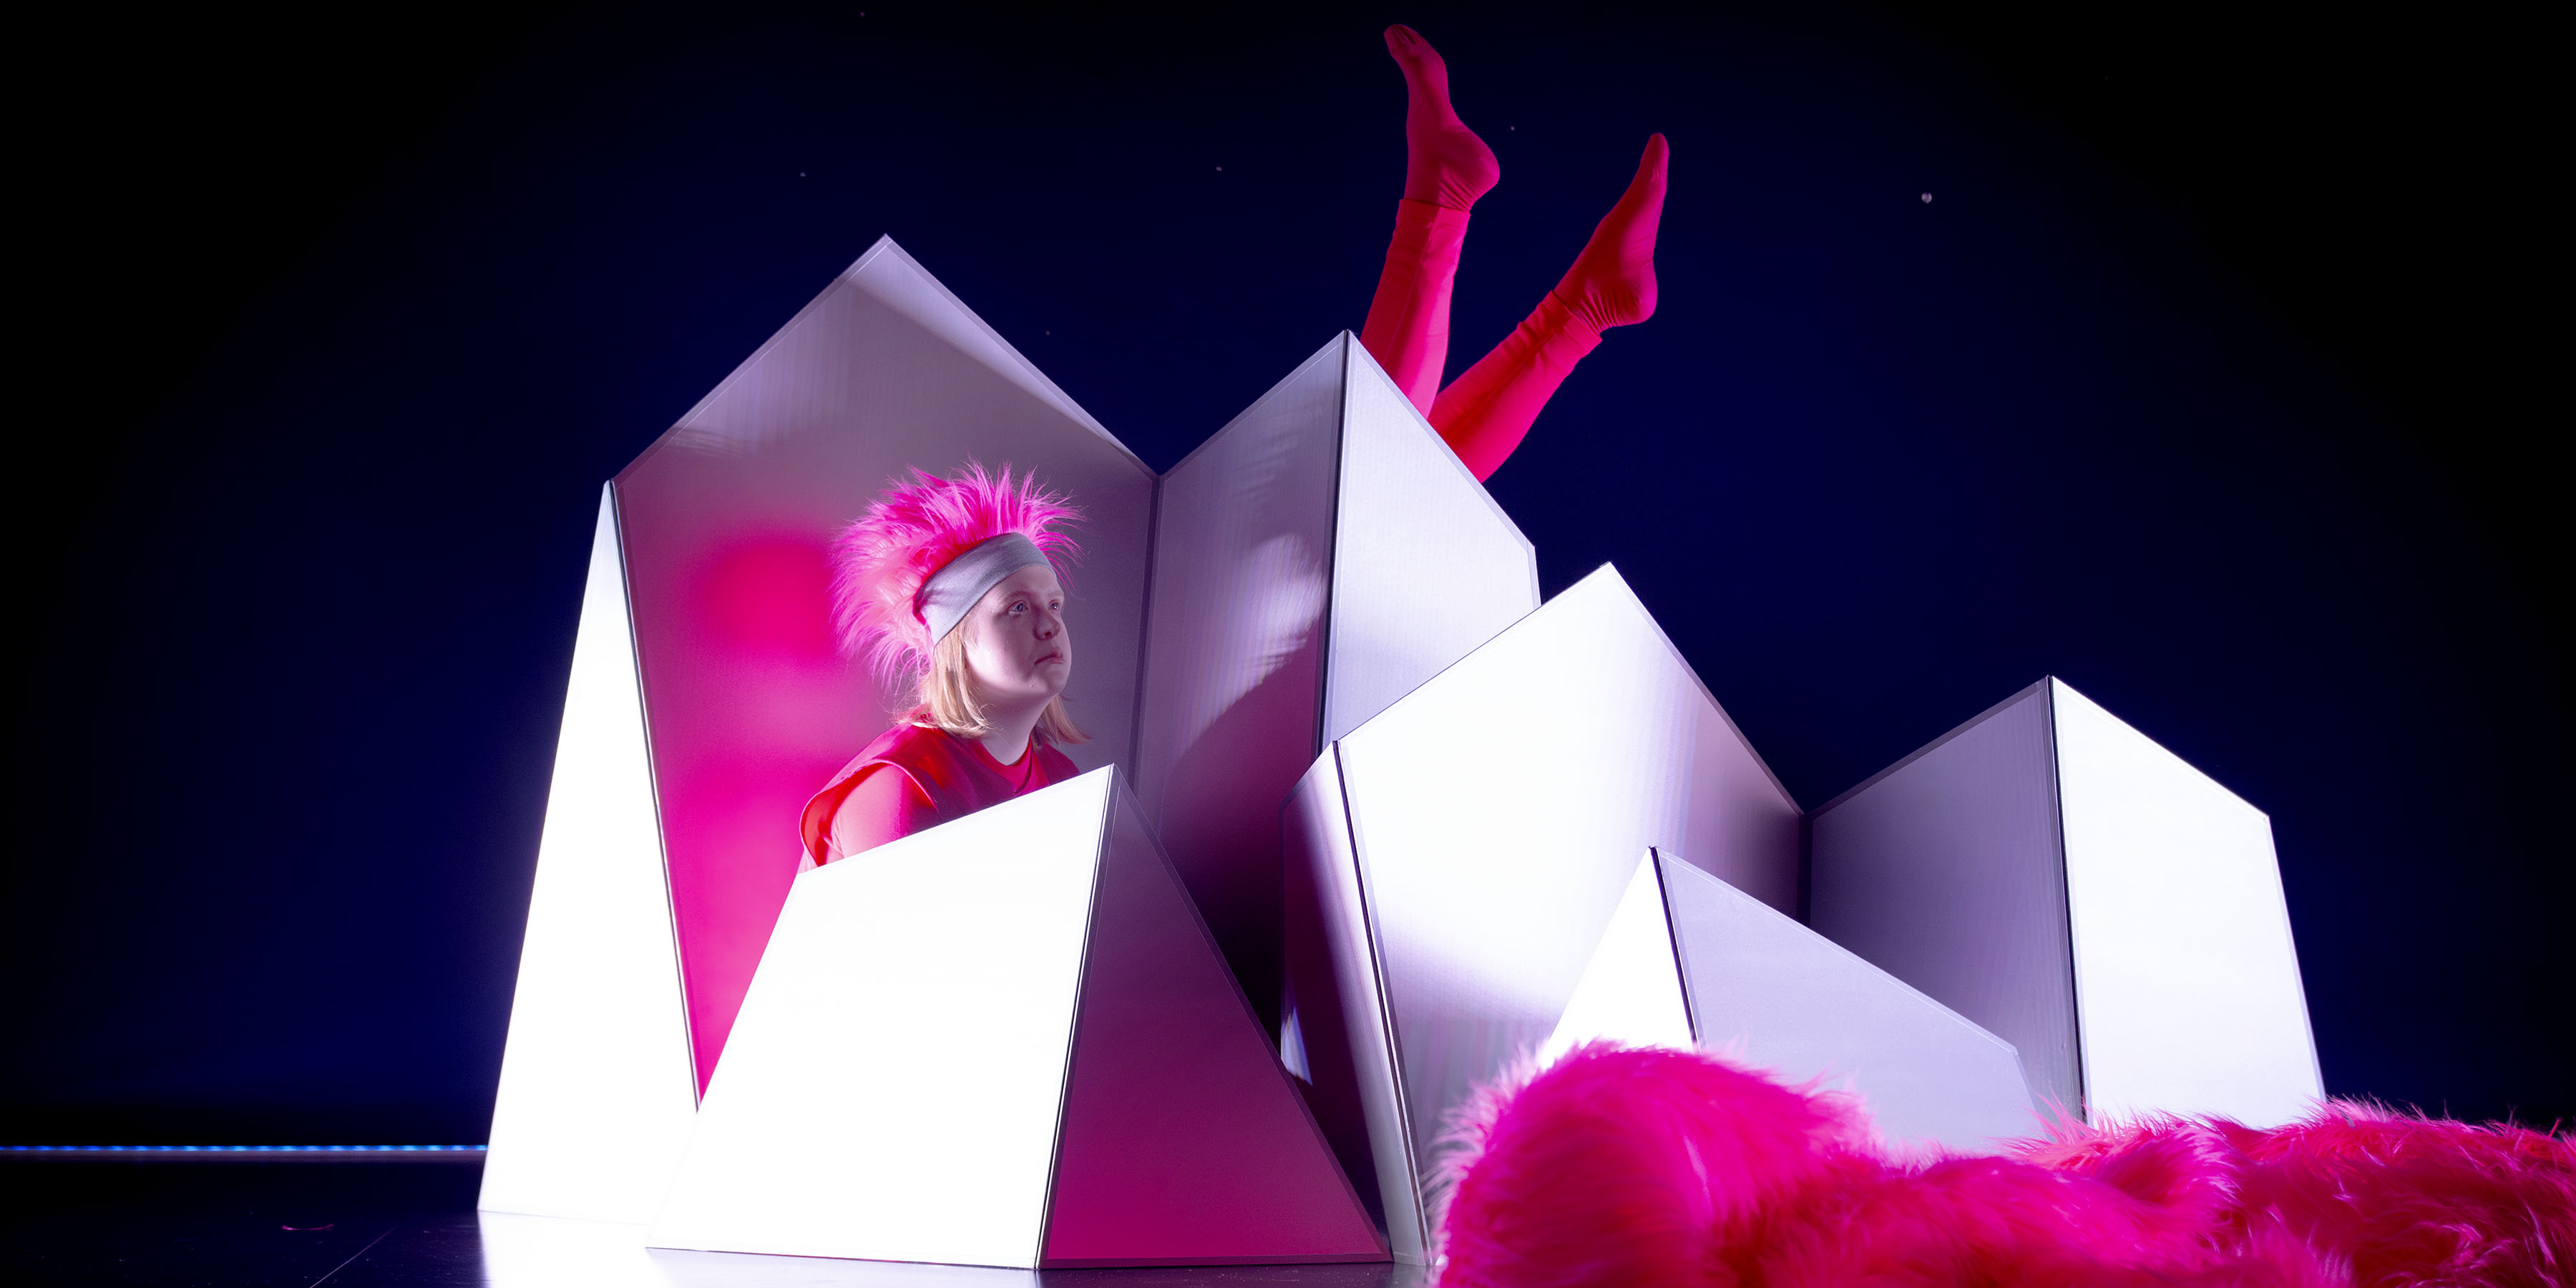 A dancer sits between a group of white screens with pointy edges, resembling icebergs. We see the dancer from their shoulder up, with their gaze fixed on the viewer. The dancer is wearing a pink body stocking with a vest on top. On their head, the dancer wears a hat with fluffy pointy pink hair. To the right behind the dancer, we see two pink legs coming up. The background is dark blue and in the foreground, we see a large fluffy pink tail. Photo: Malin Arnesson